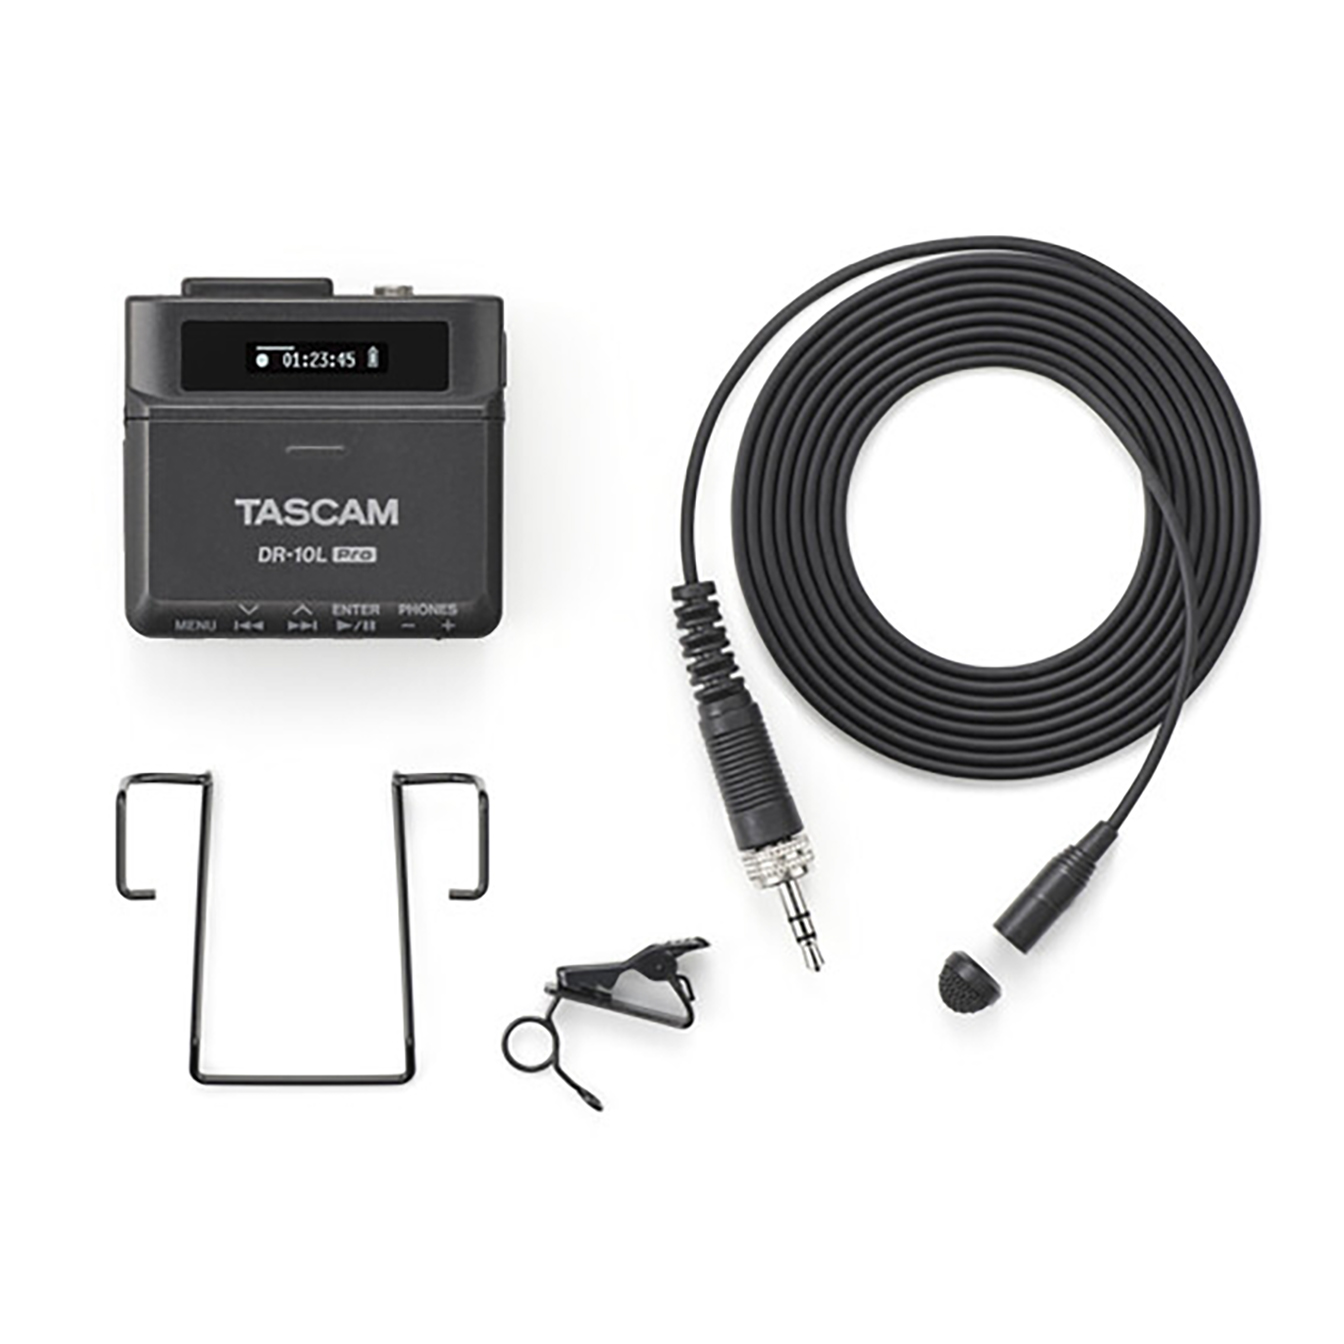 TASCAM DR-10L Micro Portable Audio Recorder with Lavalier Microphone (Black)